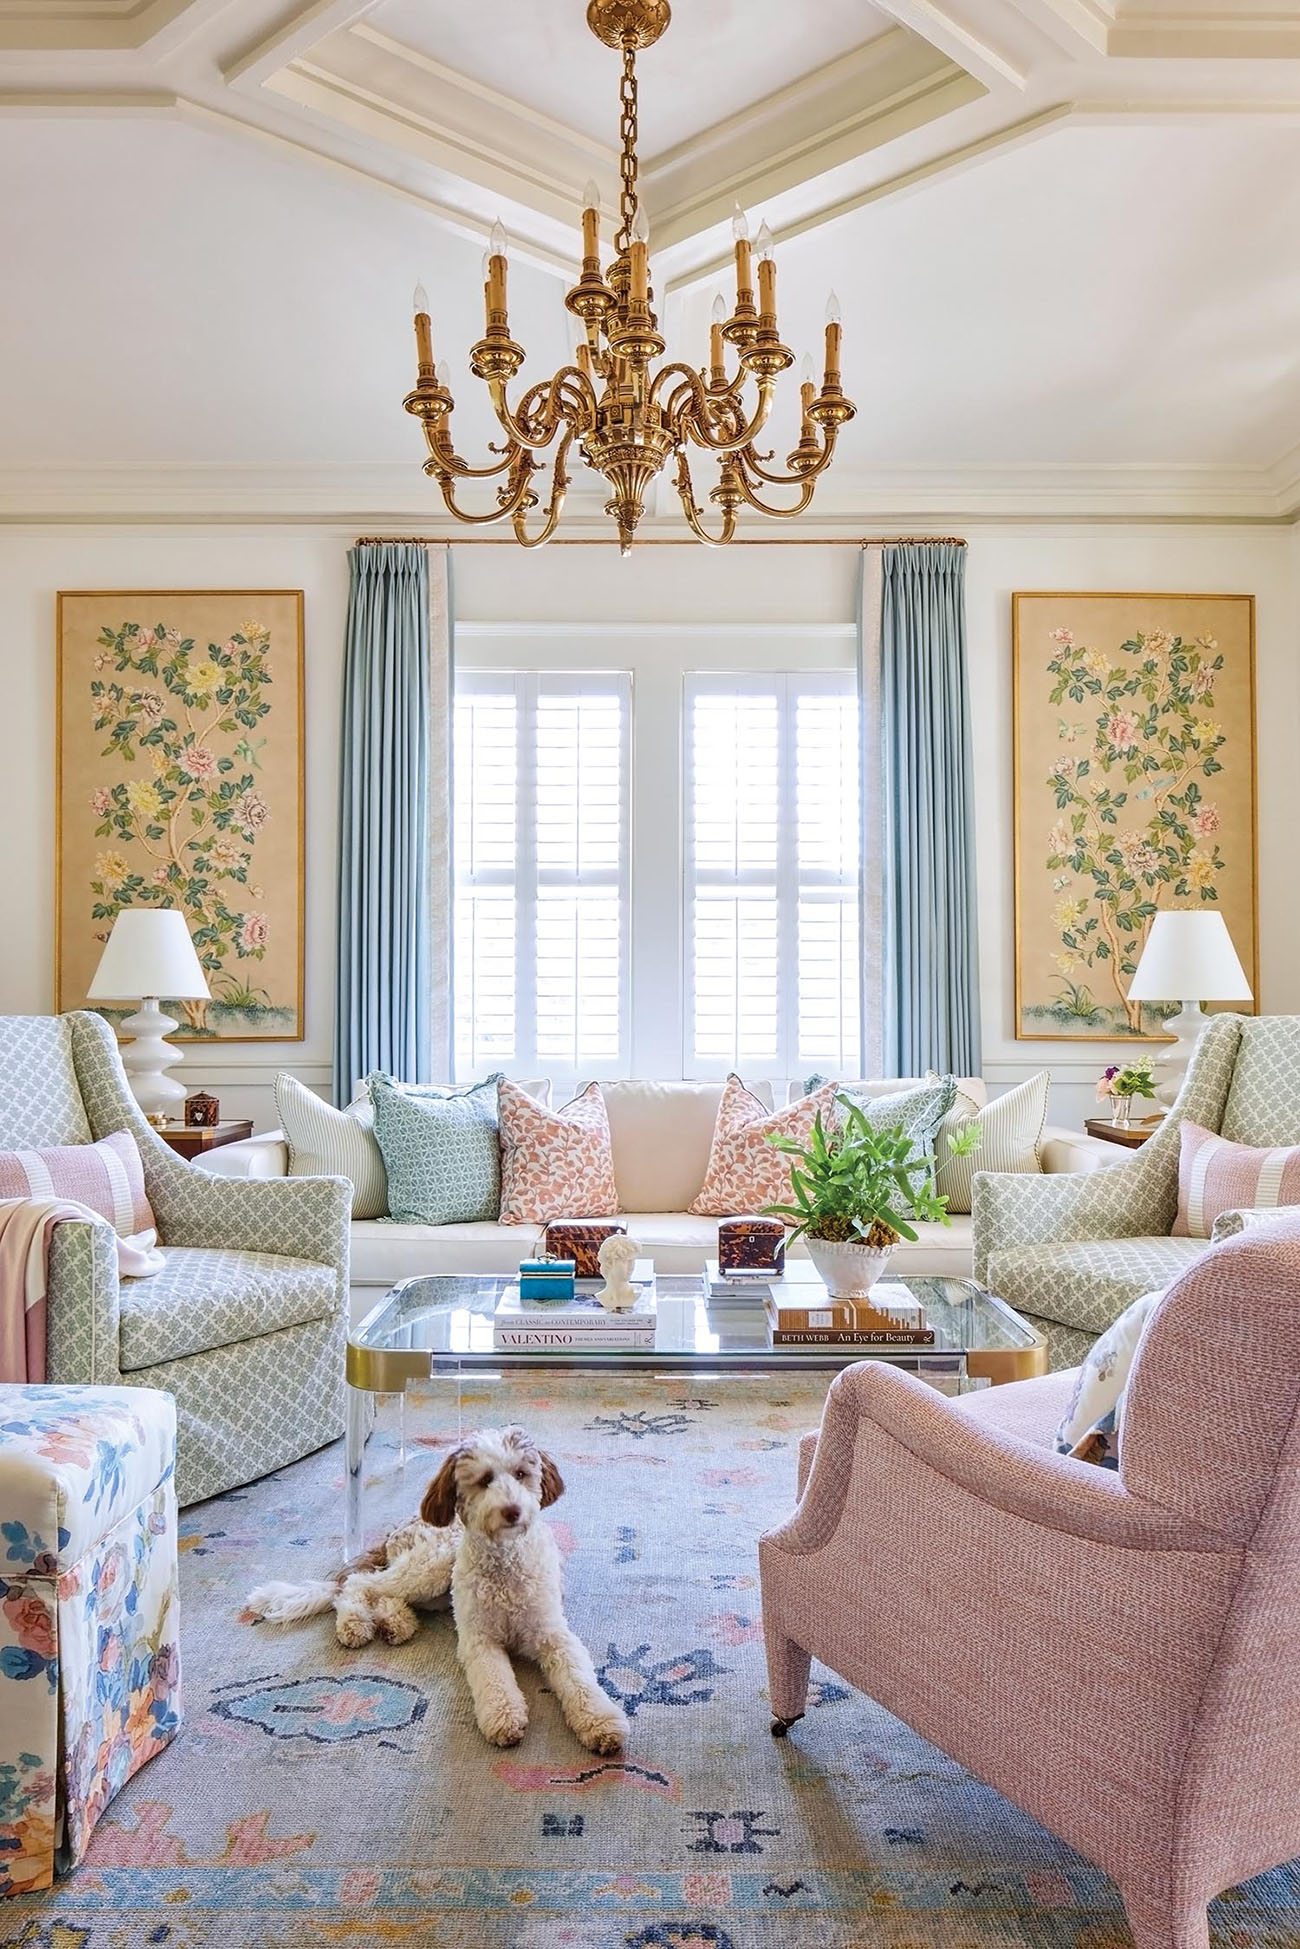 A dog sits in a pastel colored living room.